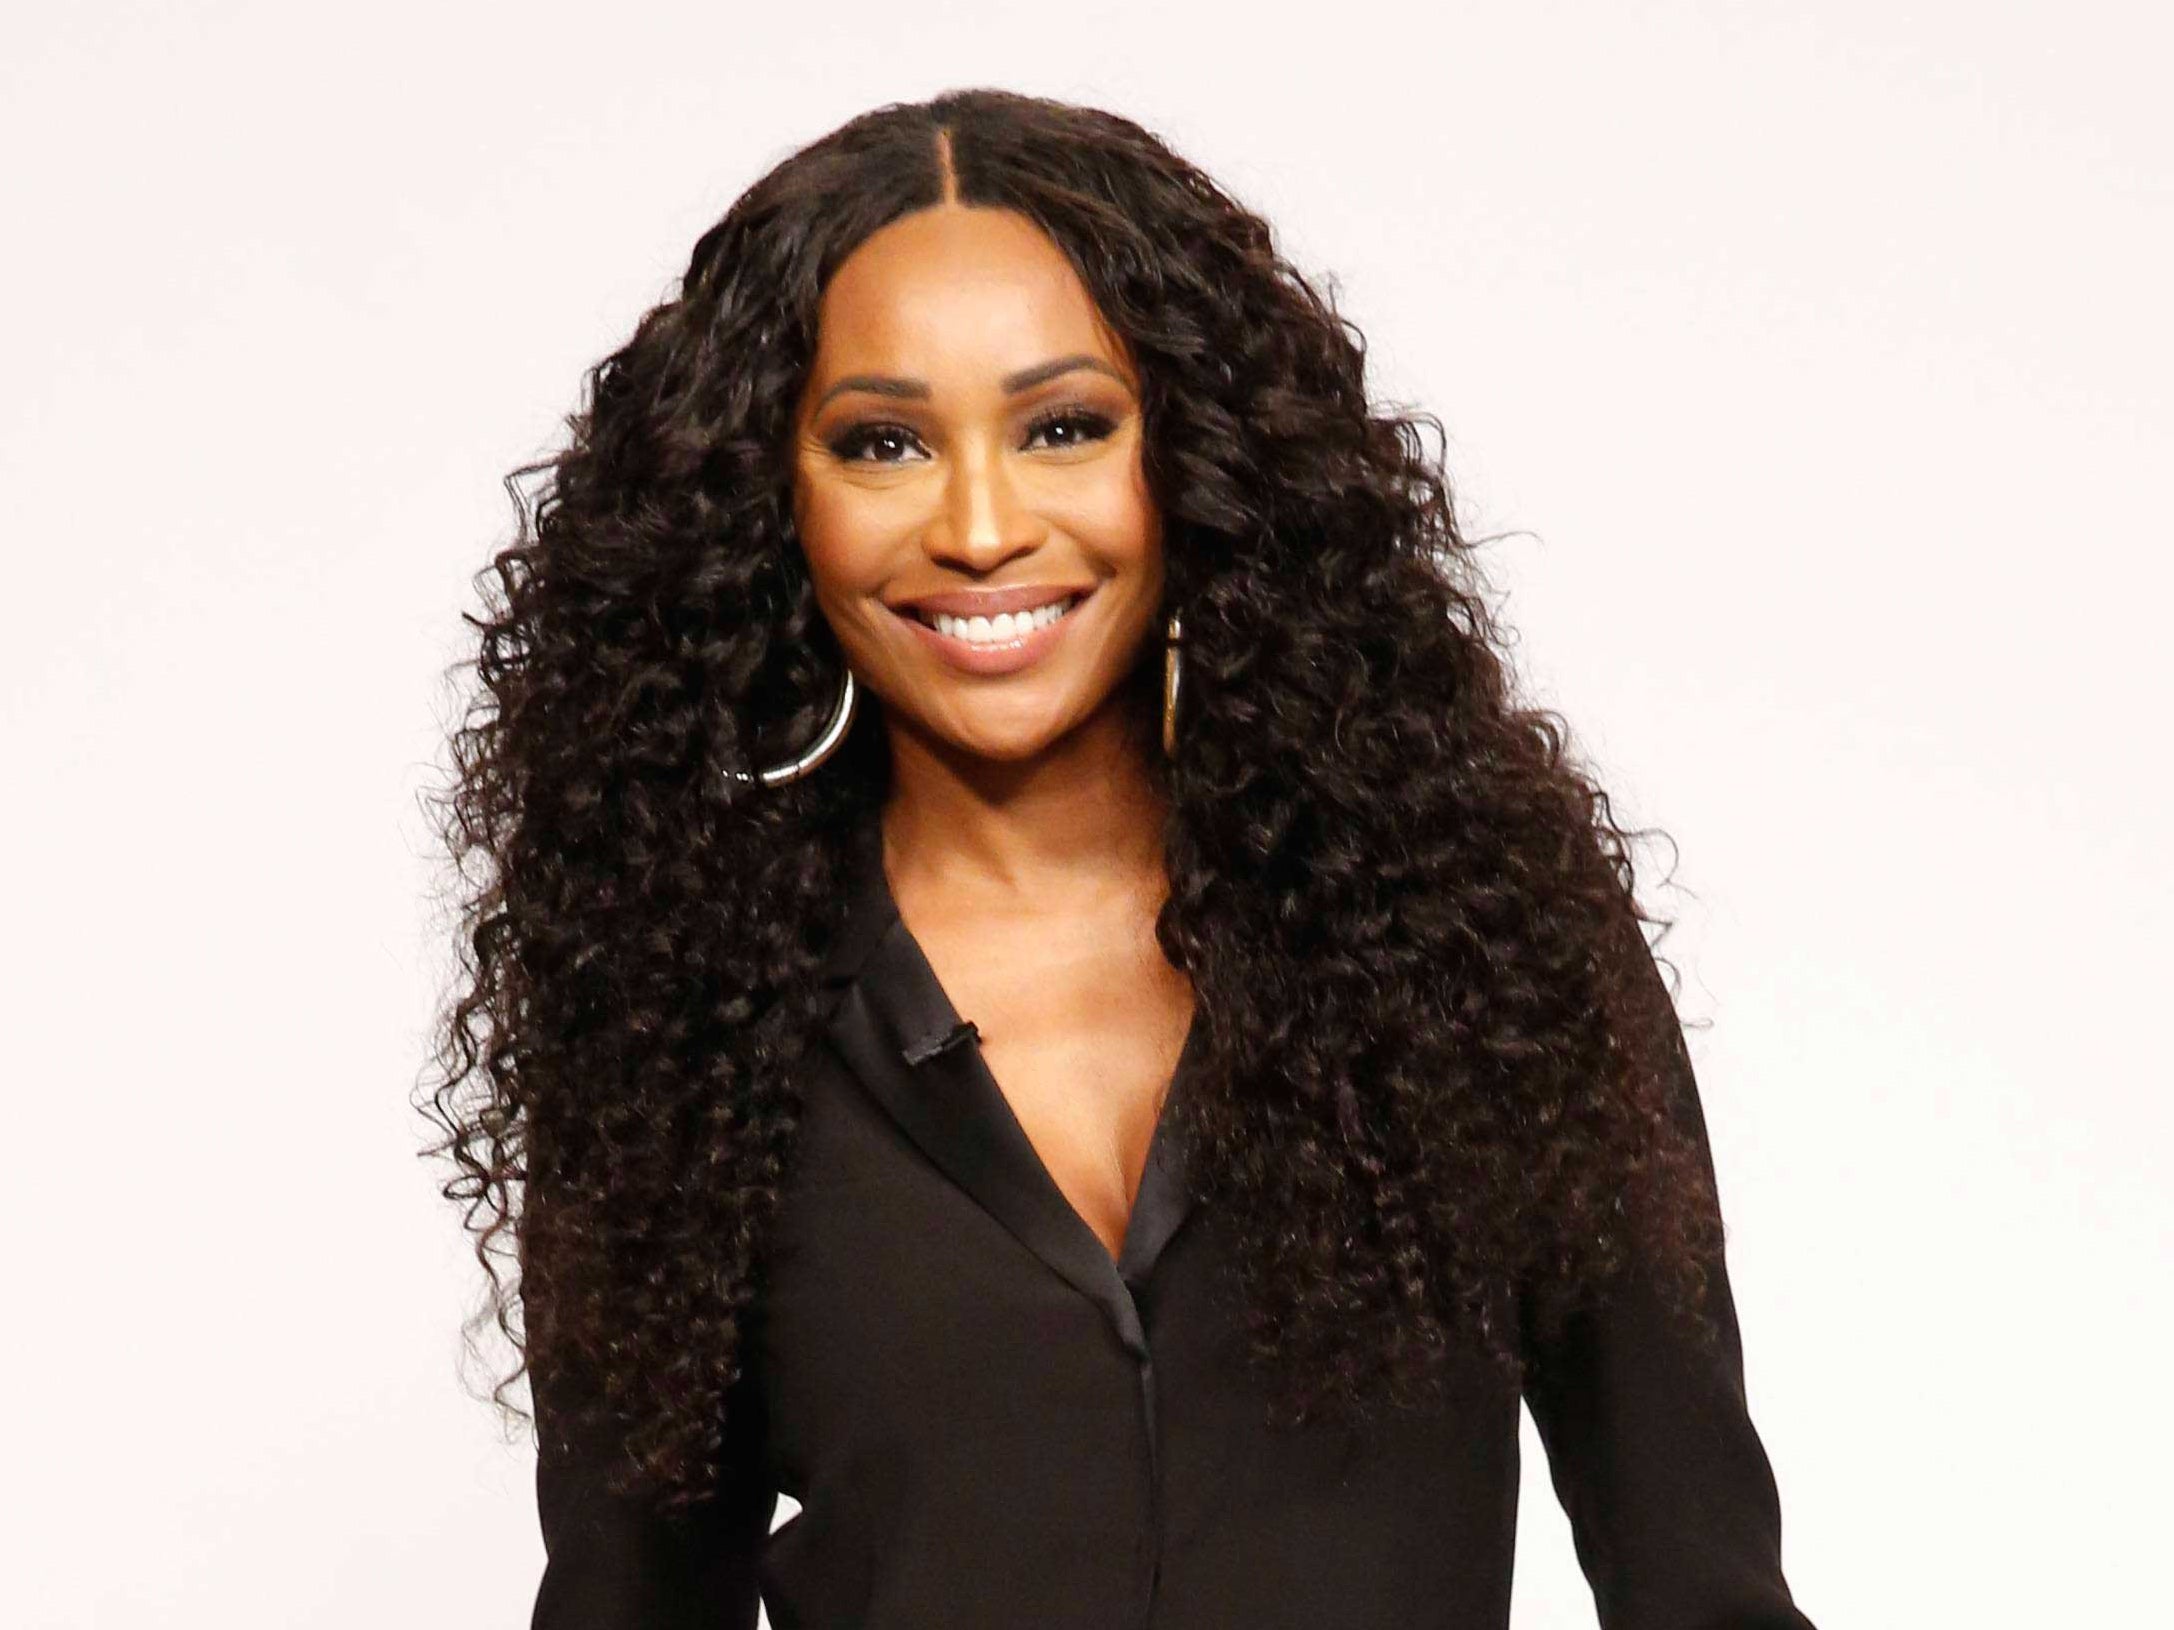 Cynthia Bailey On Divorce From Peter Thomas: ‘To Have To Go Through A Divorce On the Show Is Not Easy’
